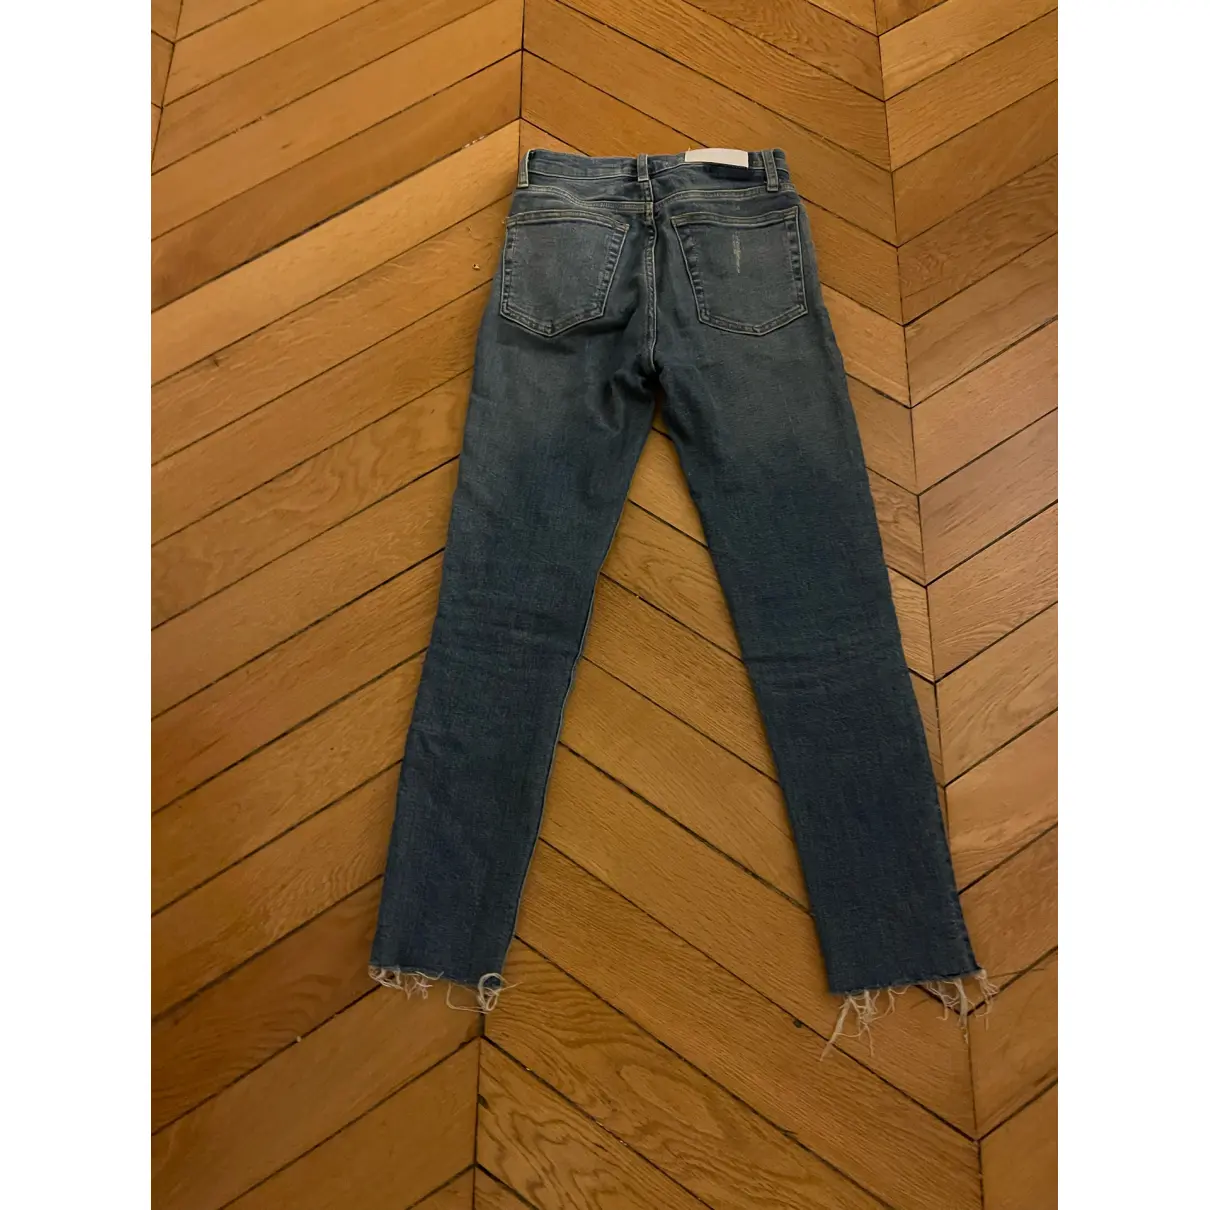 Buy Re/Done Jeans online